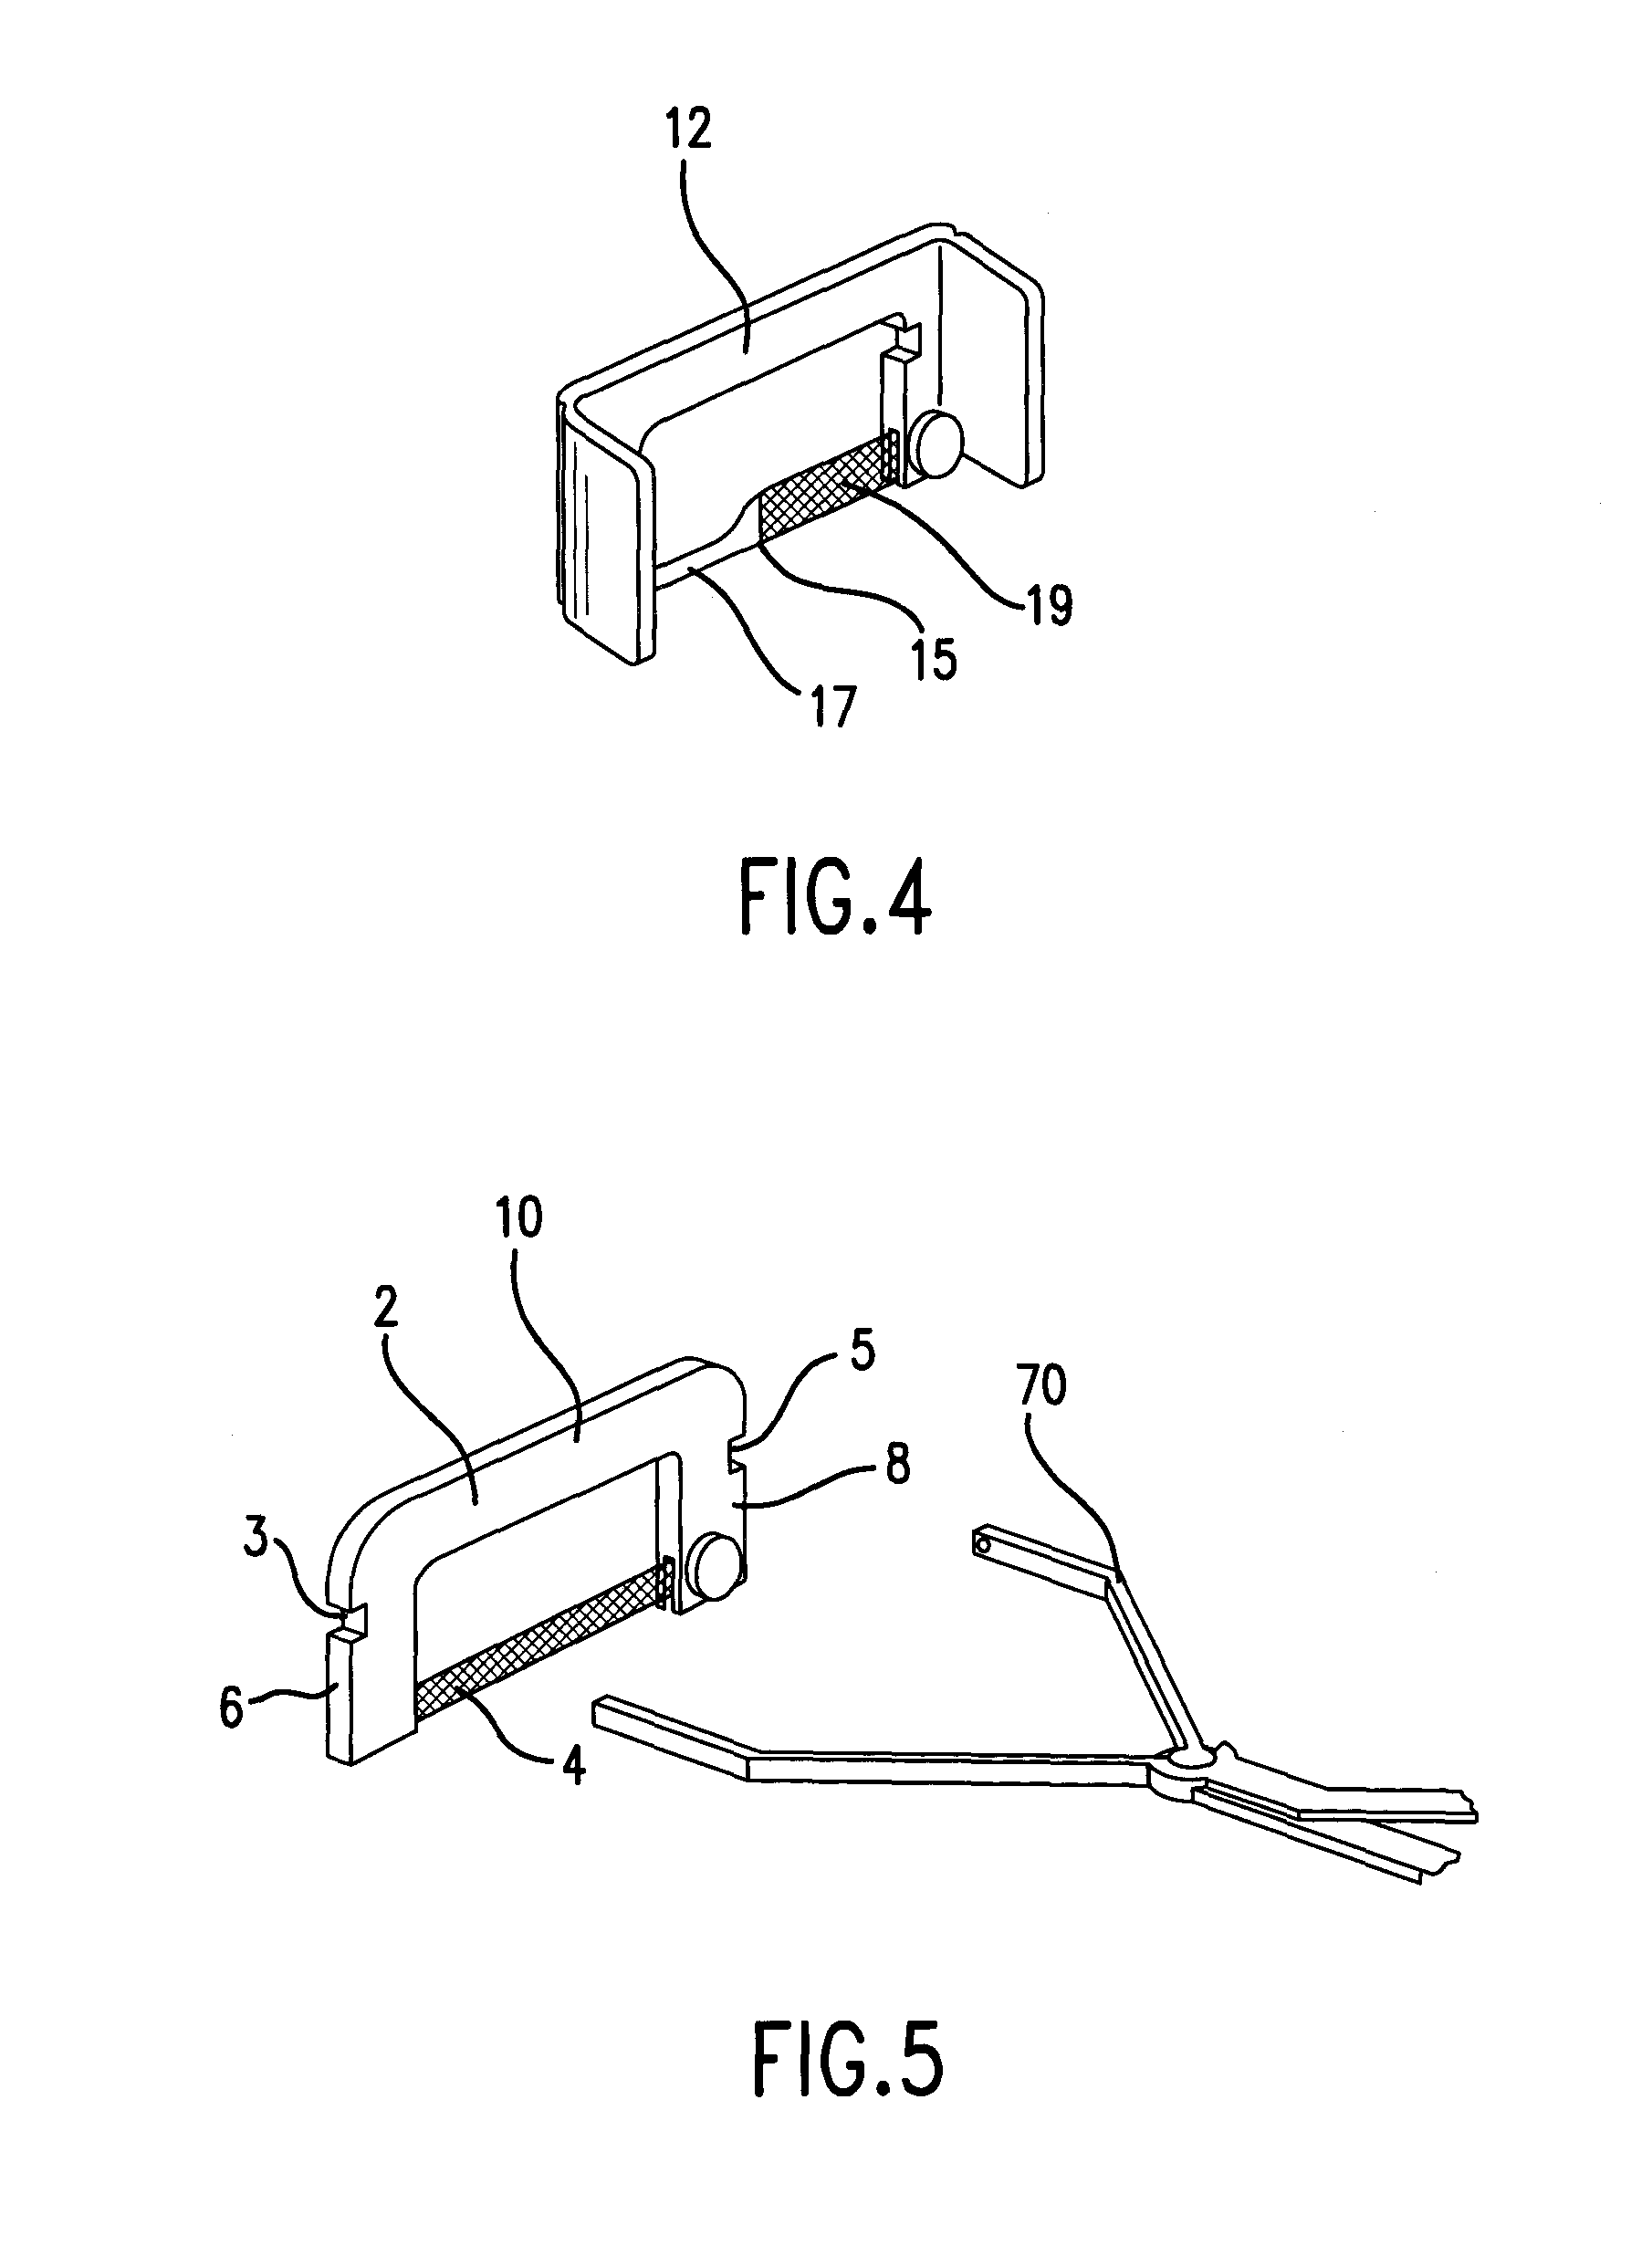 Devices and methods of applying dental composites